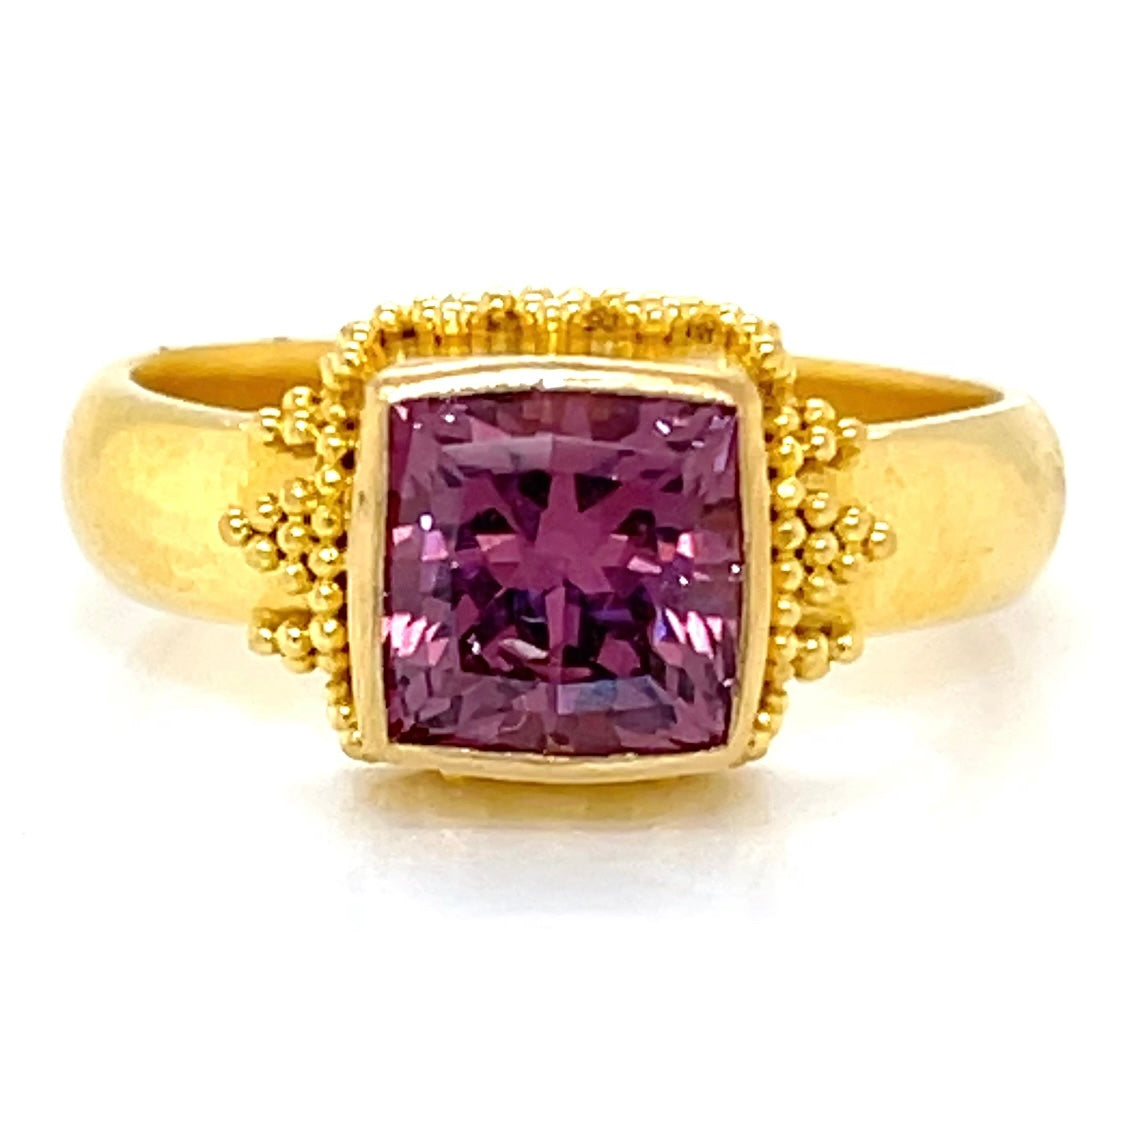 Cushion cut Pink Spinel Ring